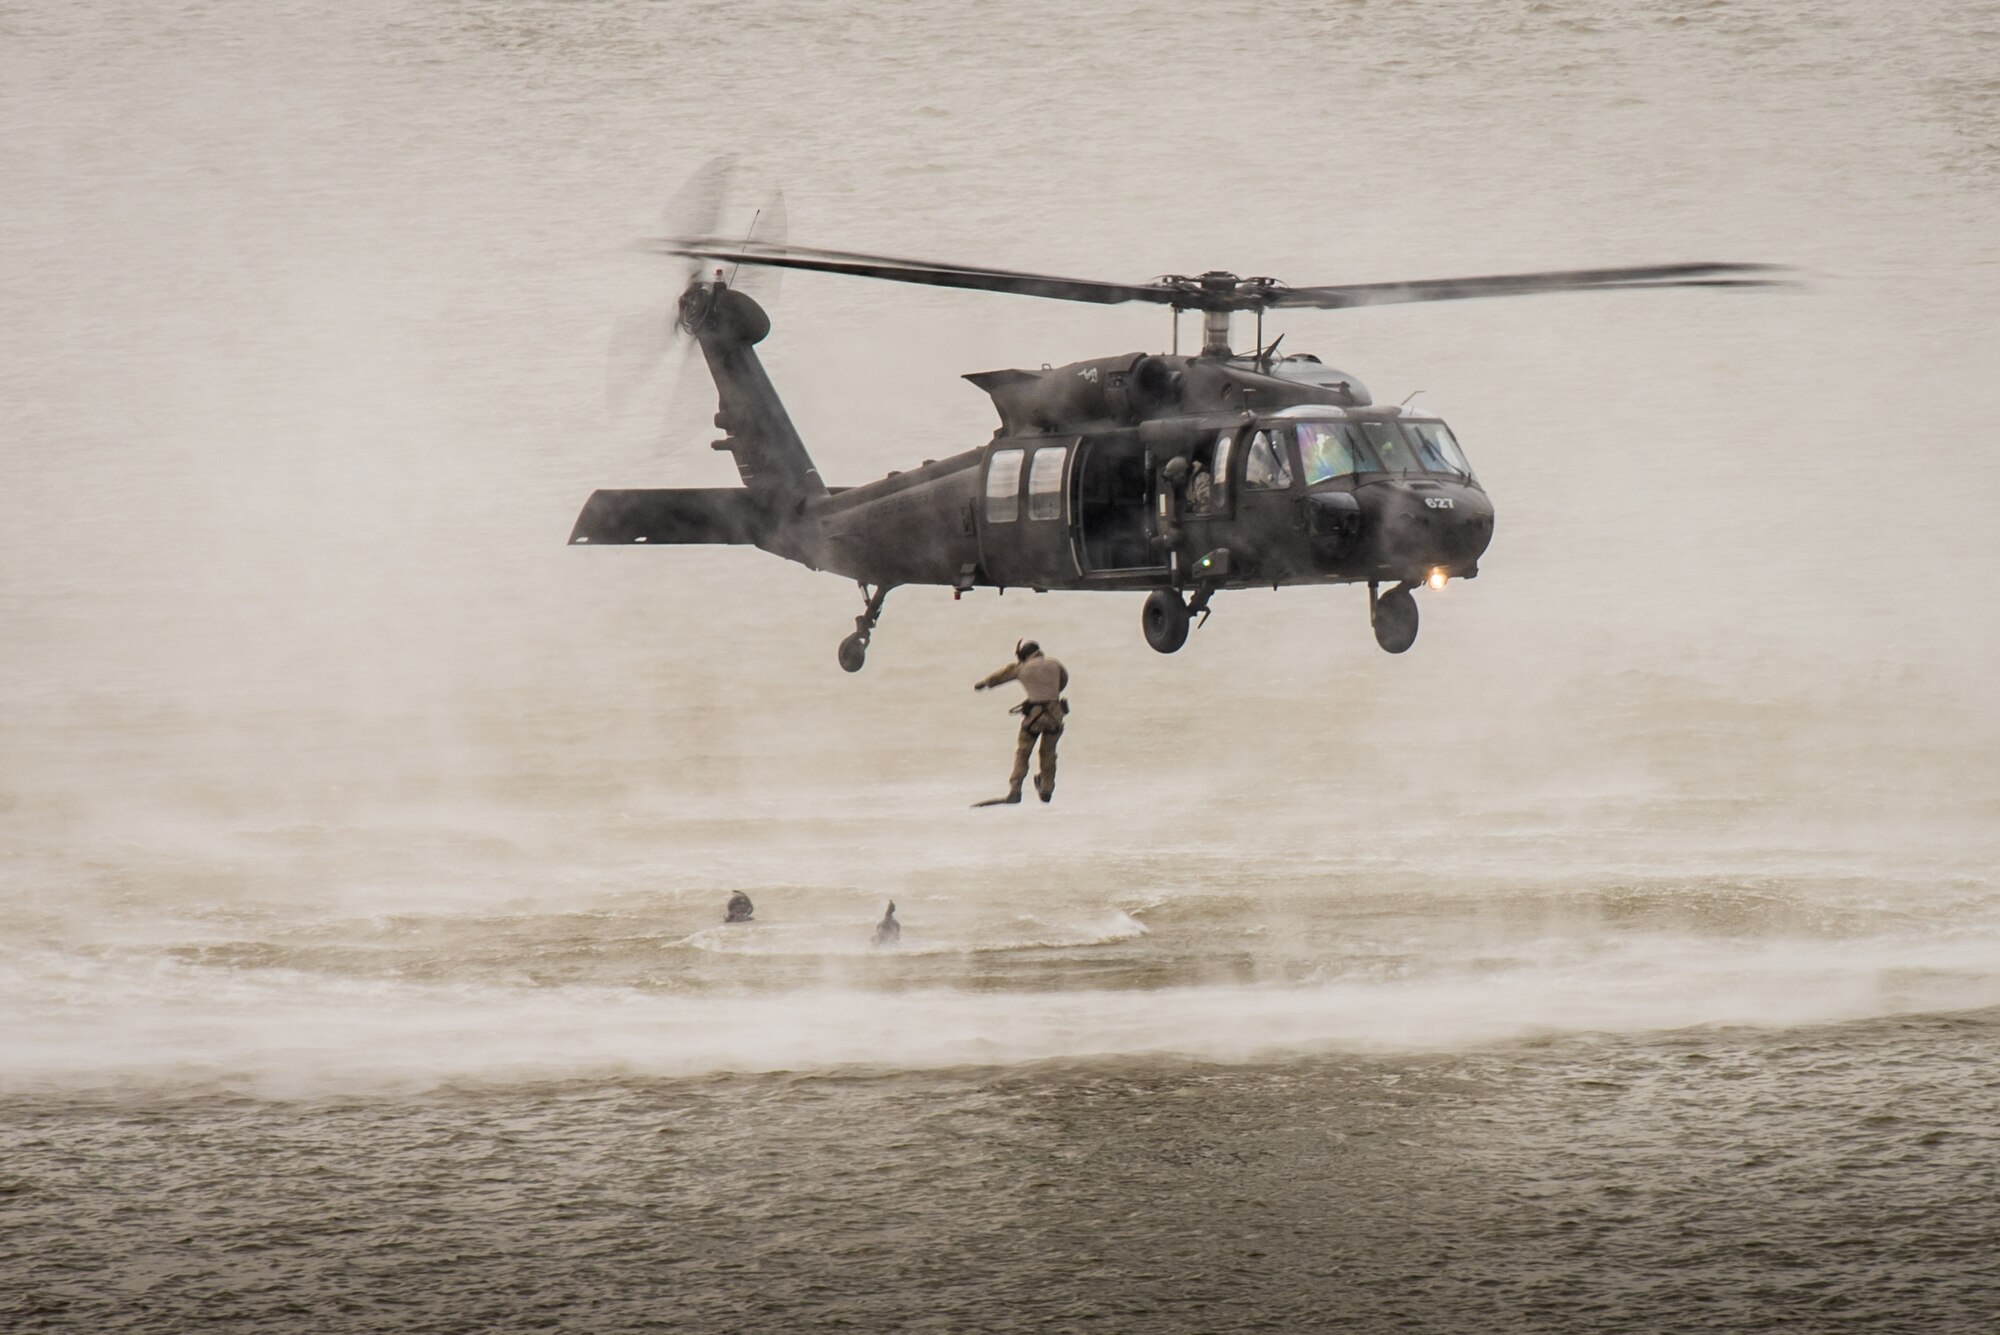 Airmen from the Kentucky Air National Guard’s 123rd Special Tactics Squadron jump in the Ohio River from a Kentucky Army National Guard UH-60 Blackhawk helicopter during the Thunder Over Louisville air show in Louisville, Ky., April 22, 2017. The demonstration is designed to show how the Airmen enter a body of water to conduct a rescue operation and recover downed personnel. (U.S. Air National Guard photo by Lt. Col. Dale Greer)